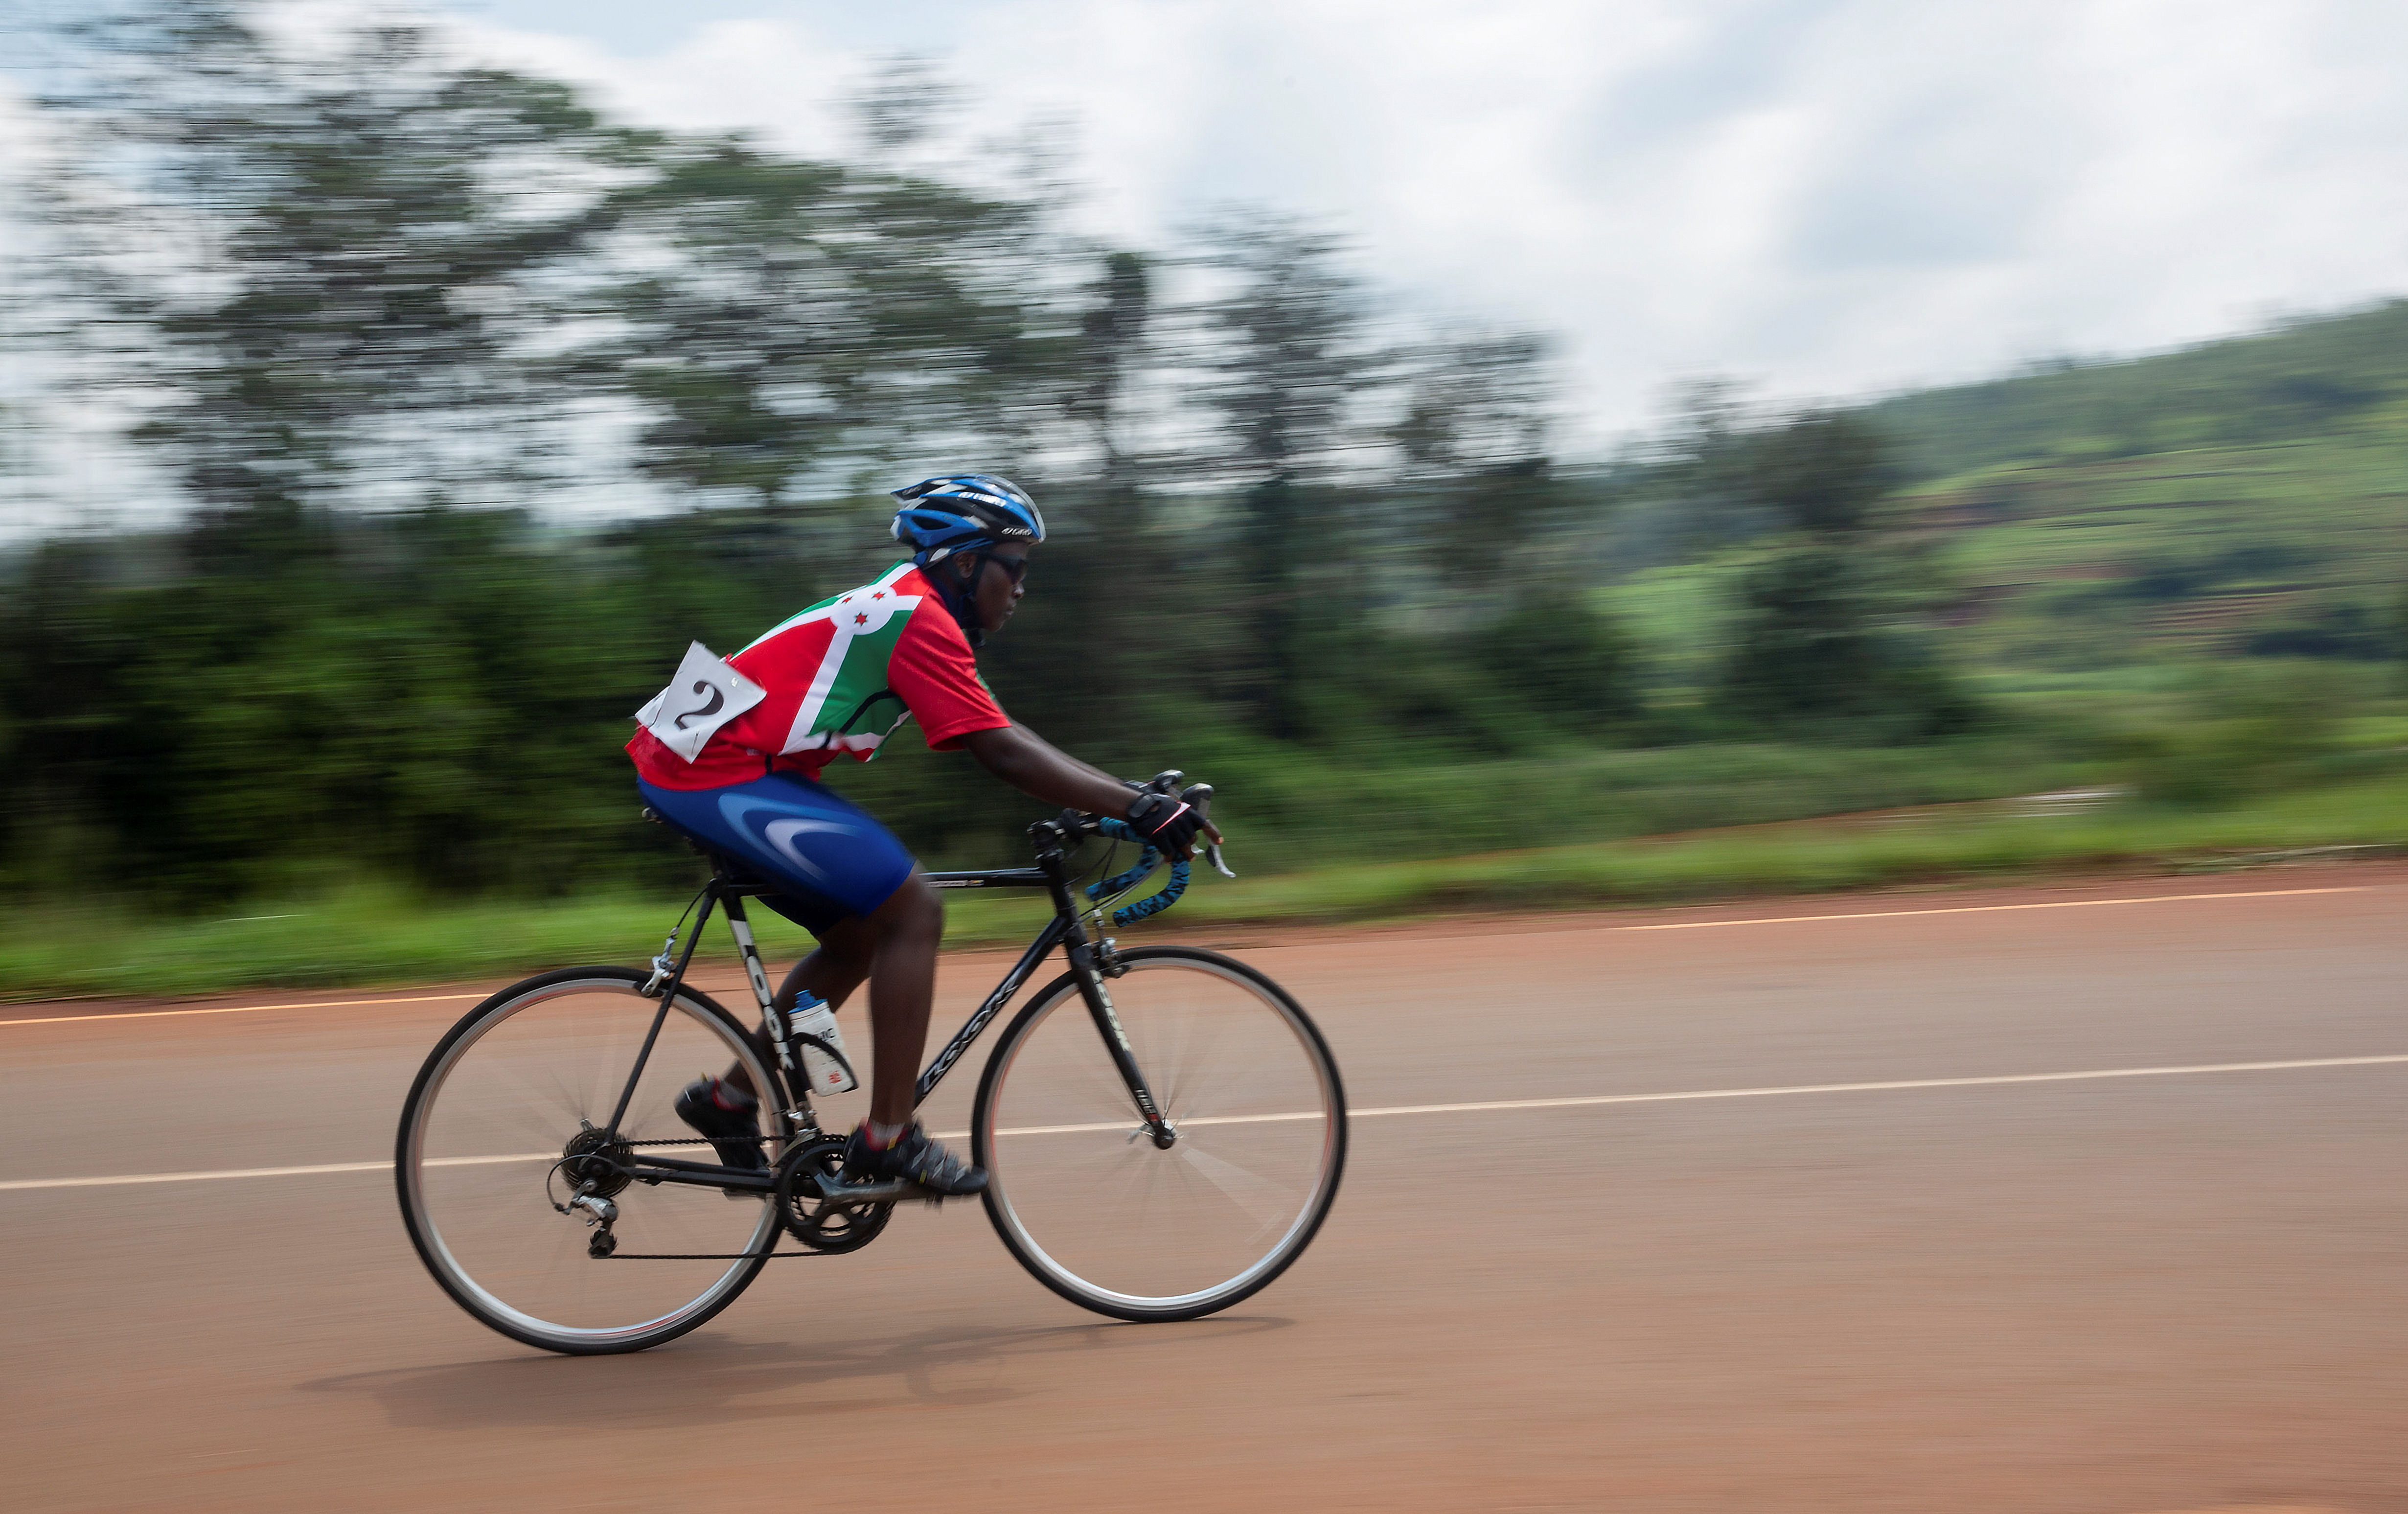 Delphine Nifasha, 19, a student and a member of Burundi women's cycling team leads the last race from Ngozi to Gitega during the first International Women's Cycling Tour in Ngozi, Burundi November 28, 2021. REUTERS/Evrard Ngendakumana